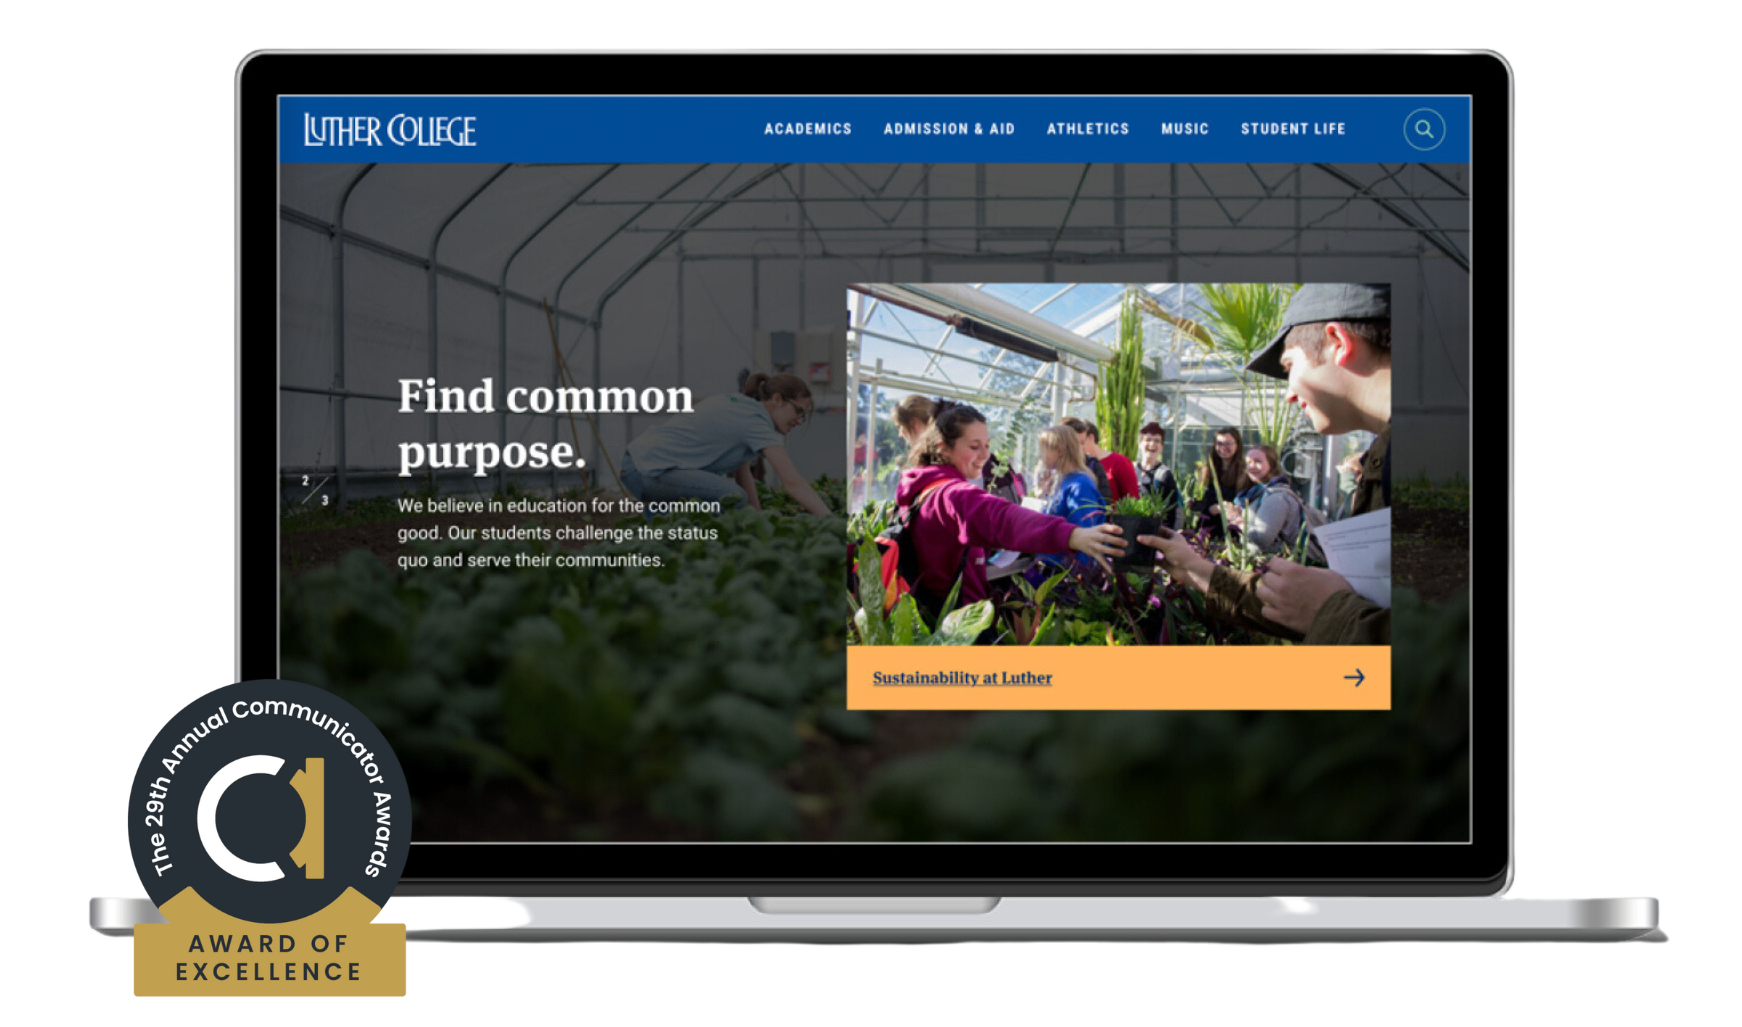 Luther College's website, designed and developed by Carnegie, wins Award of Excellence at 2023 Communicator Awards.